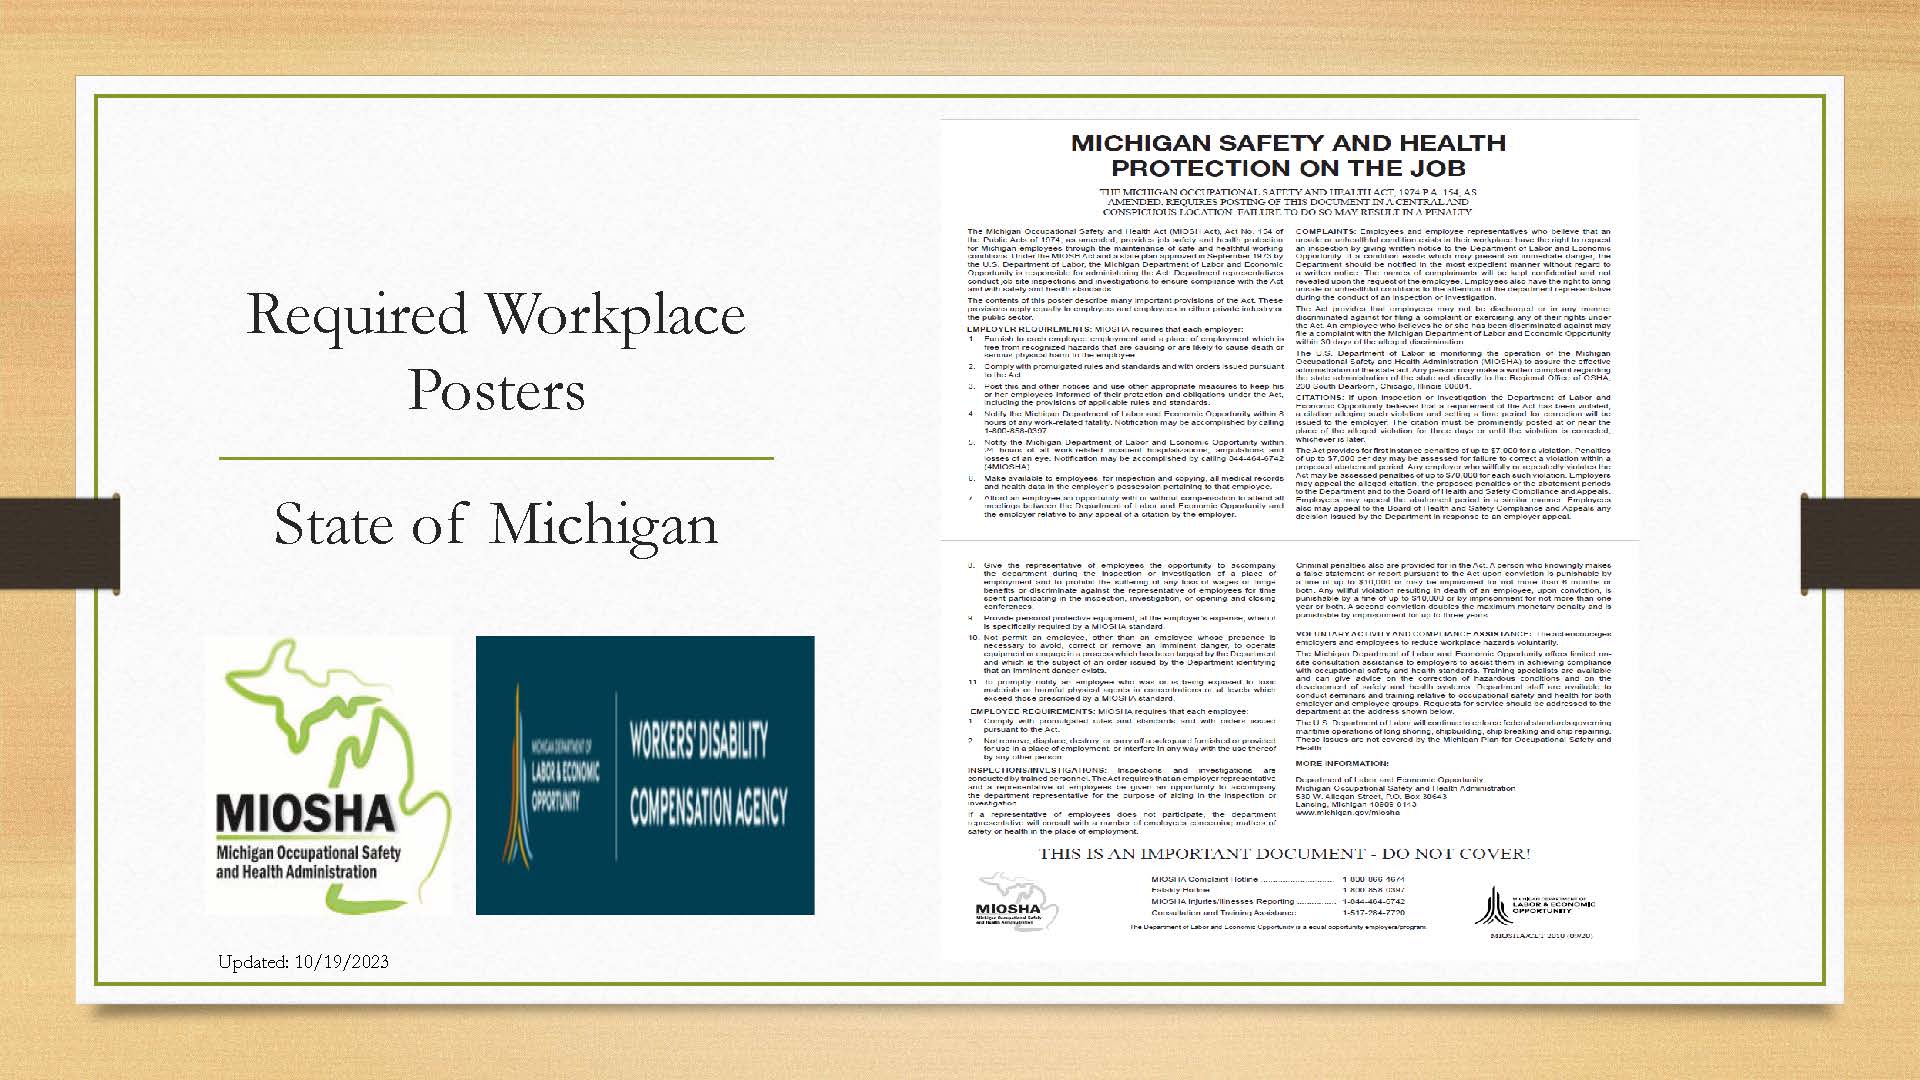 Poster showing the State Law for Michigan Safety and Health Protection